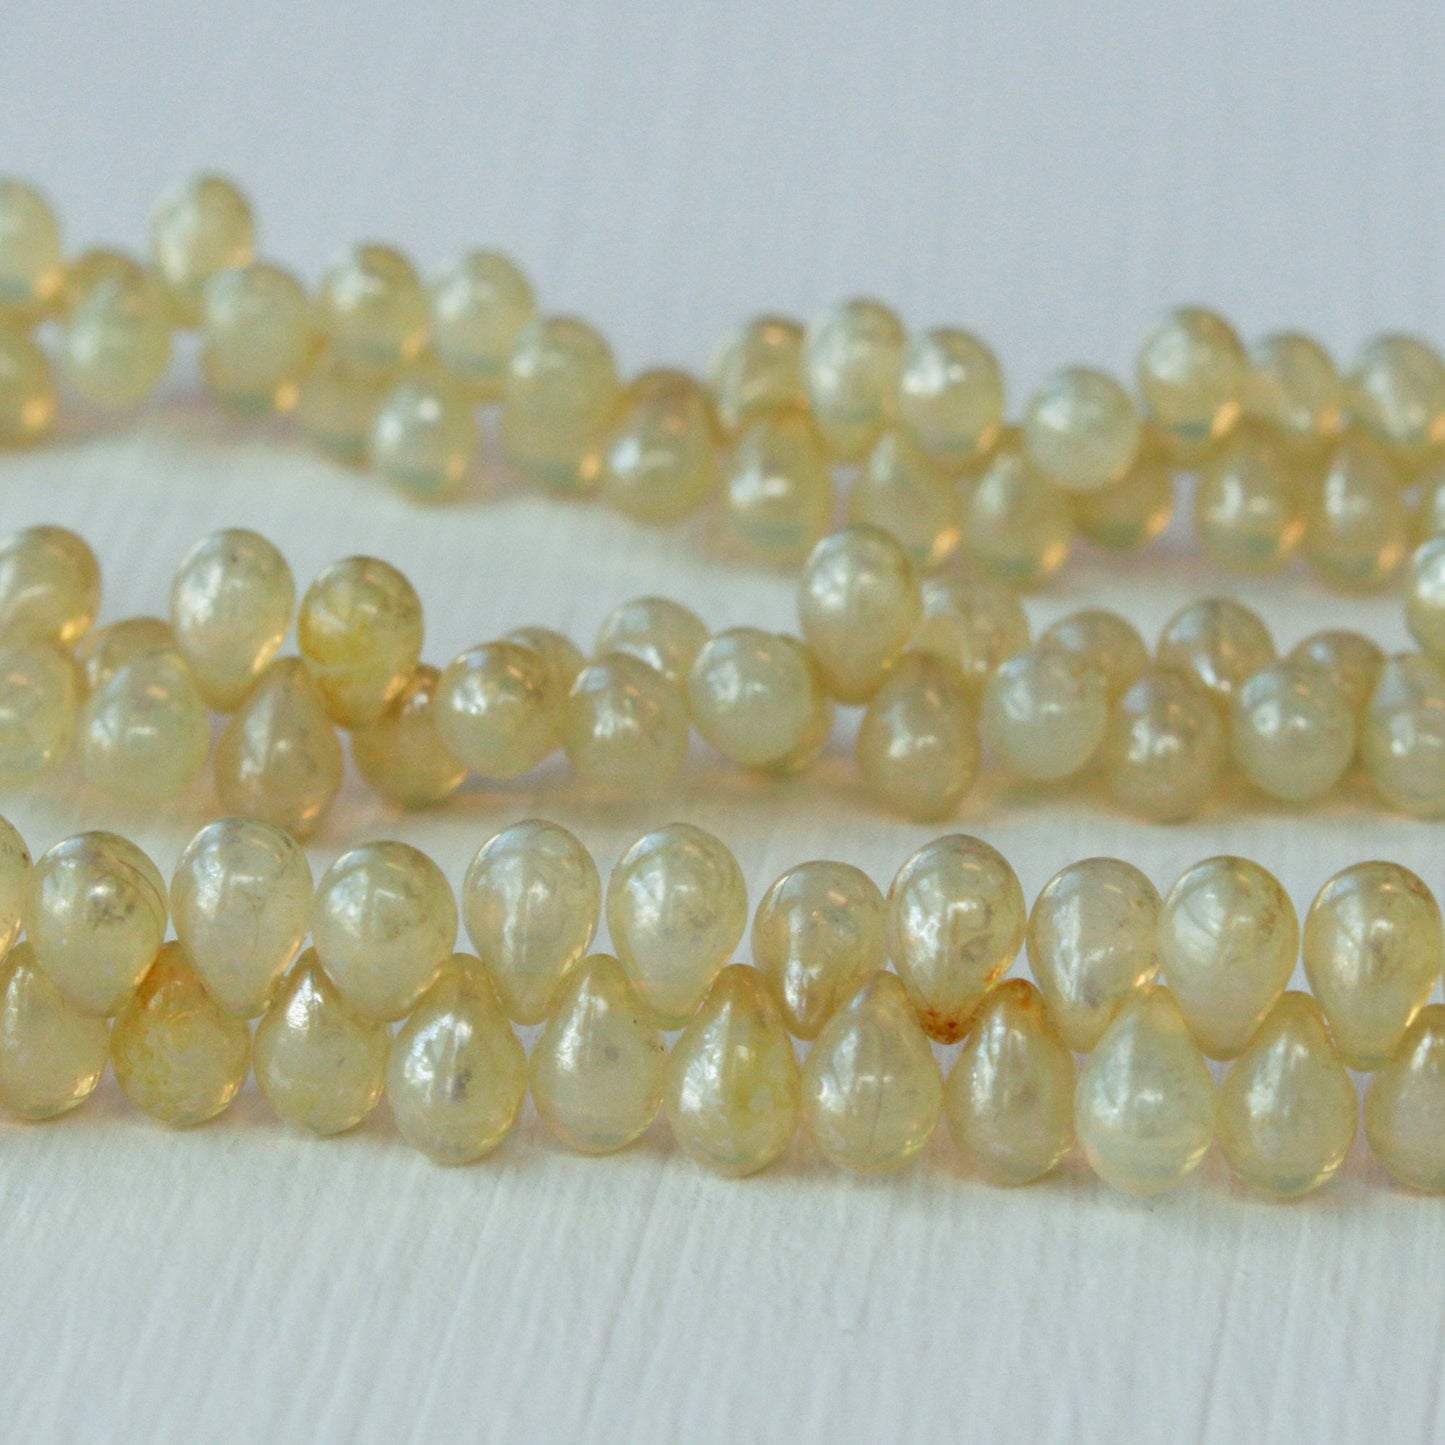 Load image into Gallery viewer, 6x9mm Glass Teardrop Beads - Ivory Champagne - 50 Beads
